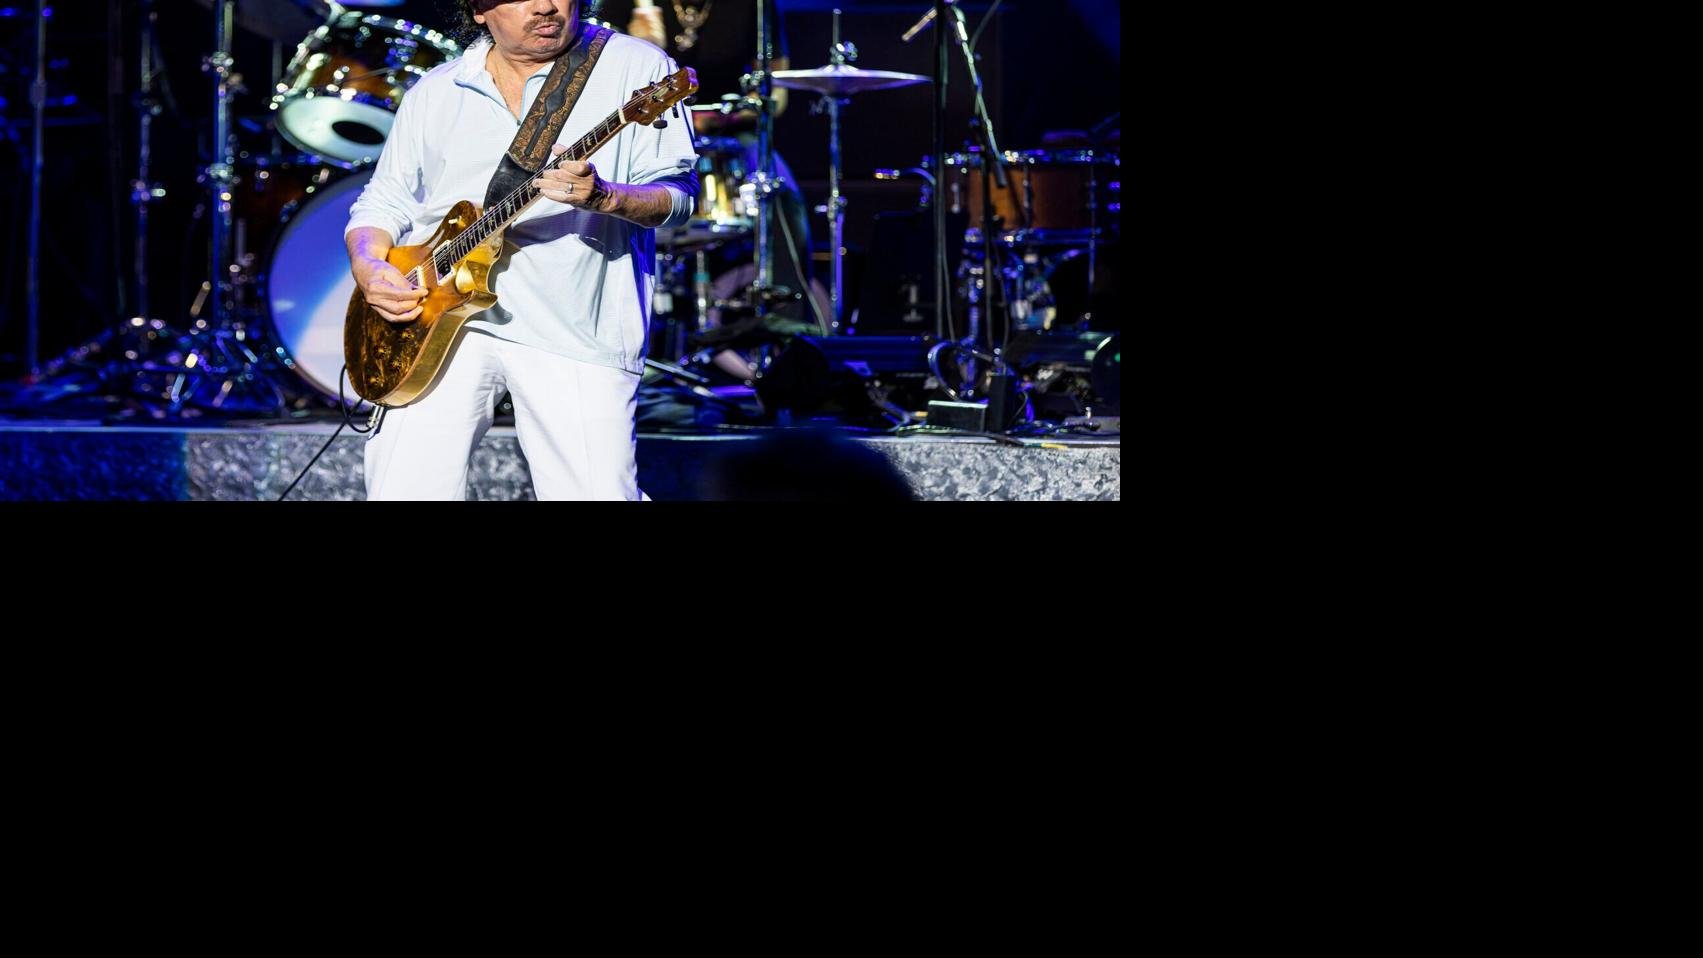 Carlos Santana collapses during Michigan concert, ‘is doing well’